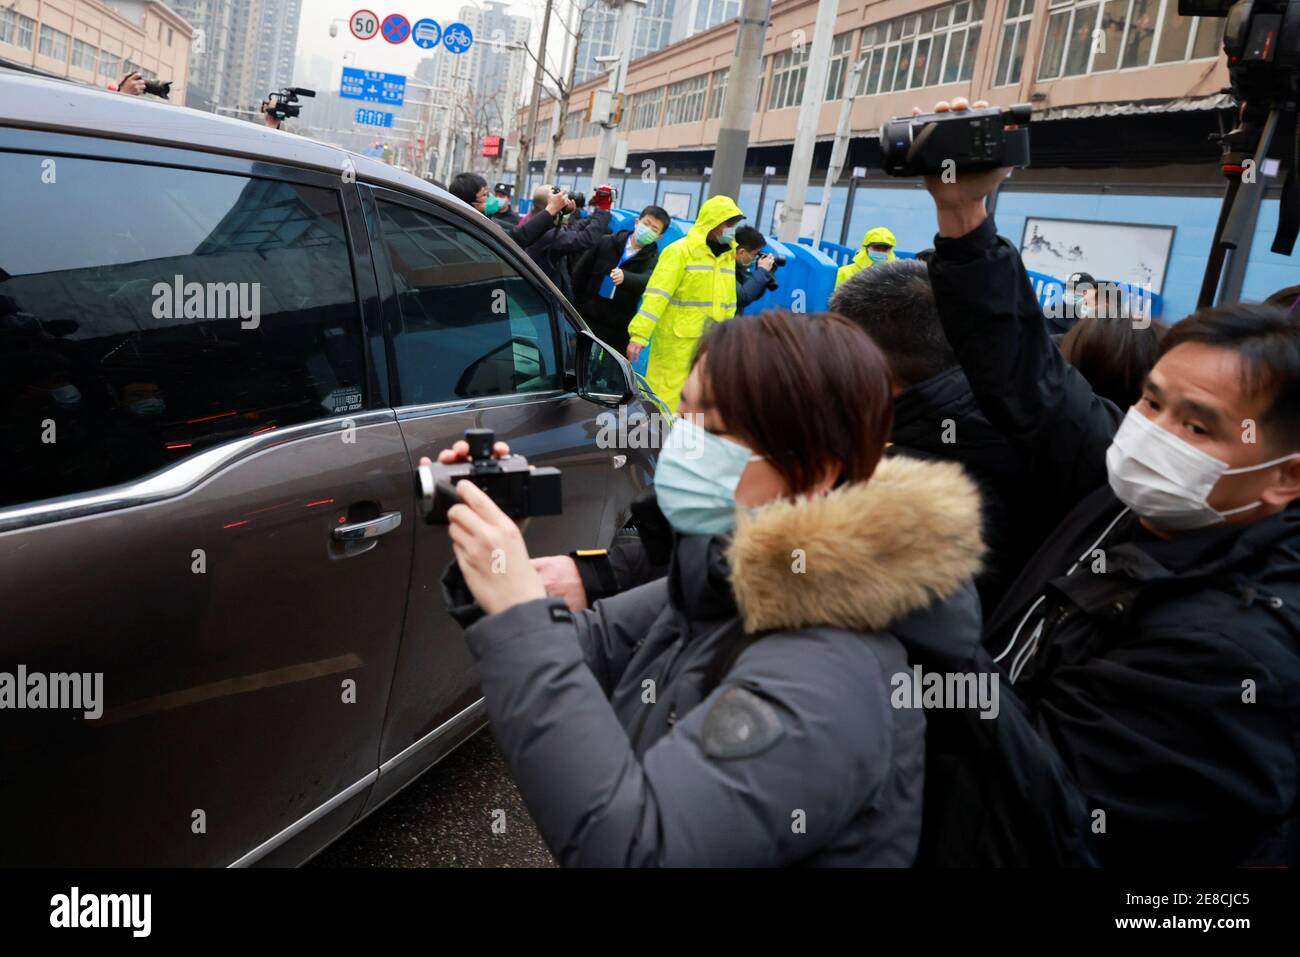 A car carrying members of the World Health Organization (WHO) team tasked with investigating the origins of the coronavirus disease (COVID-19) arrives at Huanan seafood market in Wuhan, Hubei province, China January 31, 2021. REUTERS/Thomas Peter Stock Photo